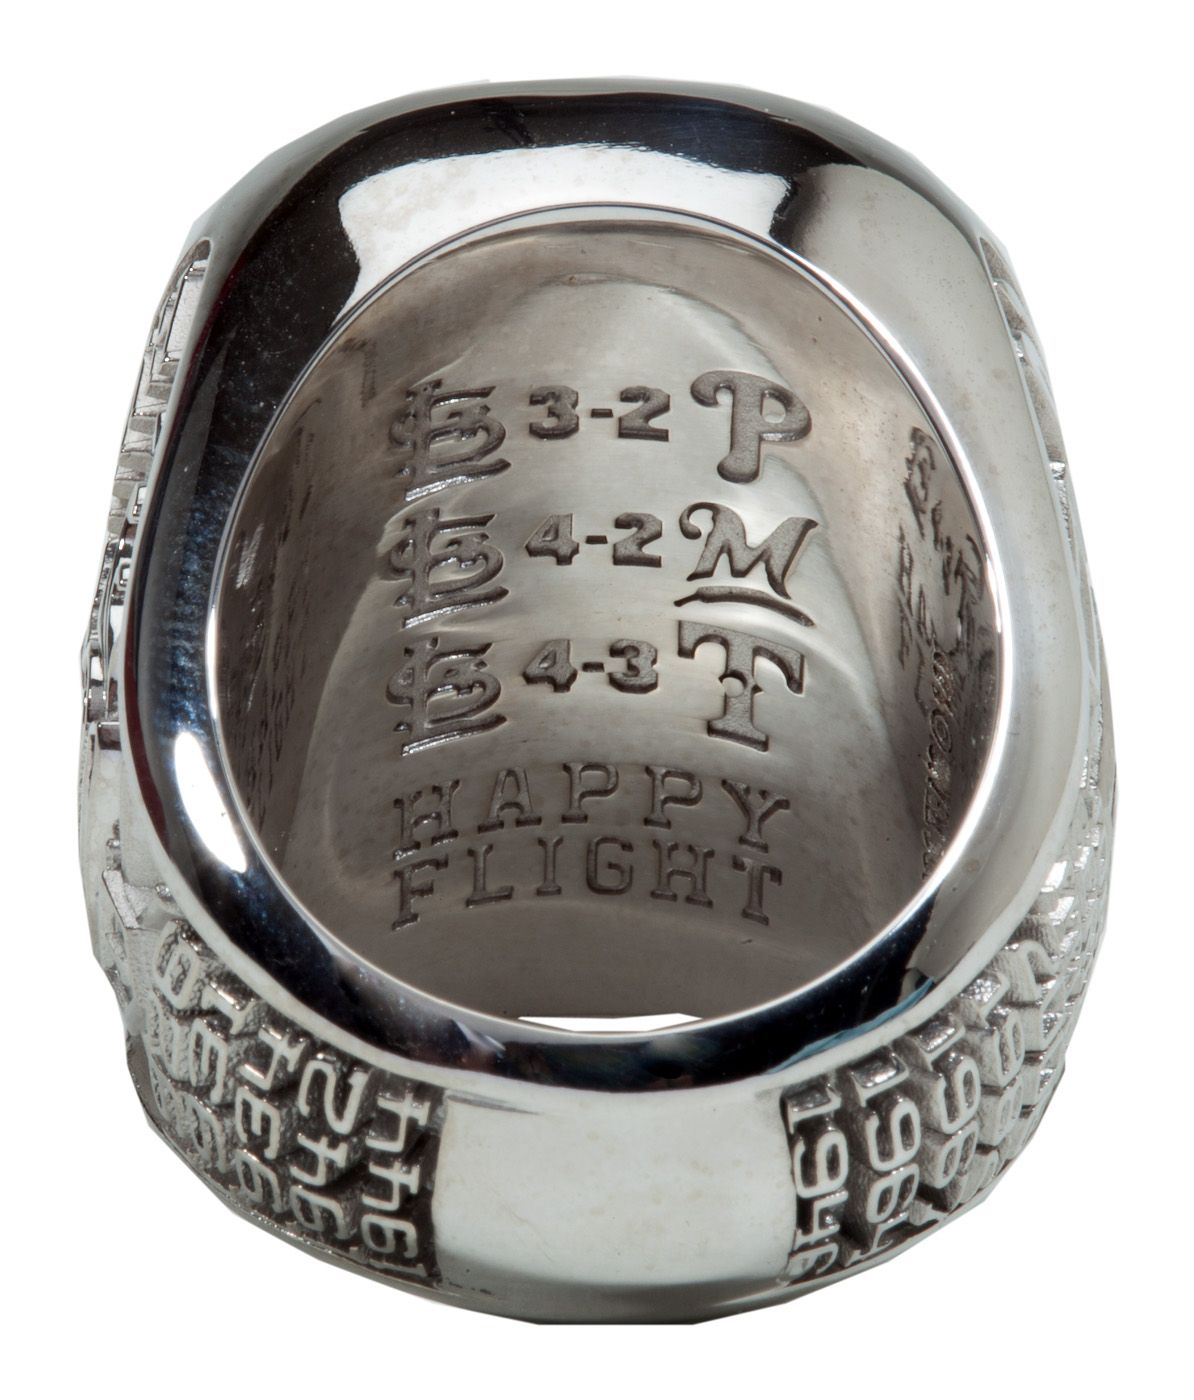 2011 St. Louis Cardinals World Championship Ring Presented to